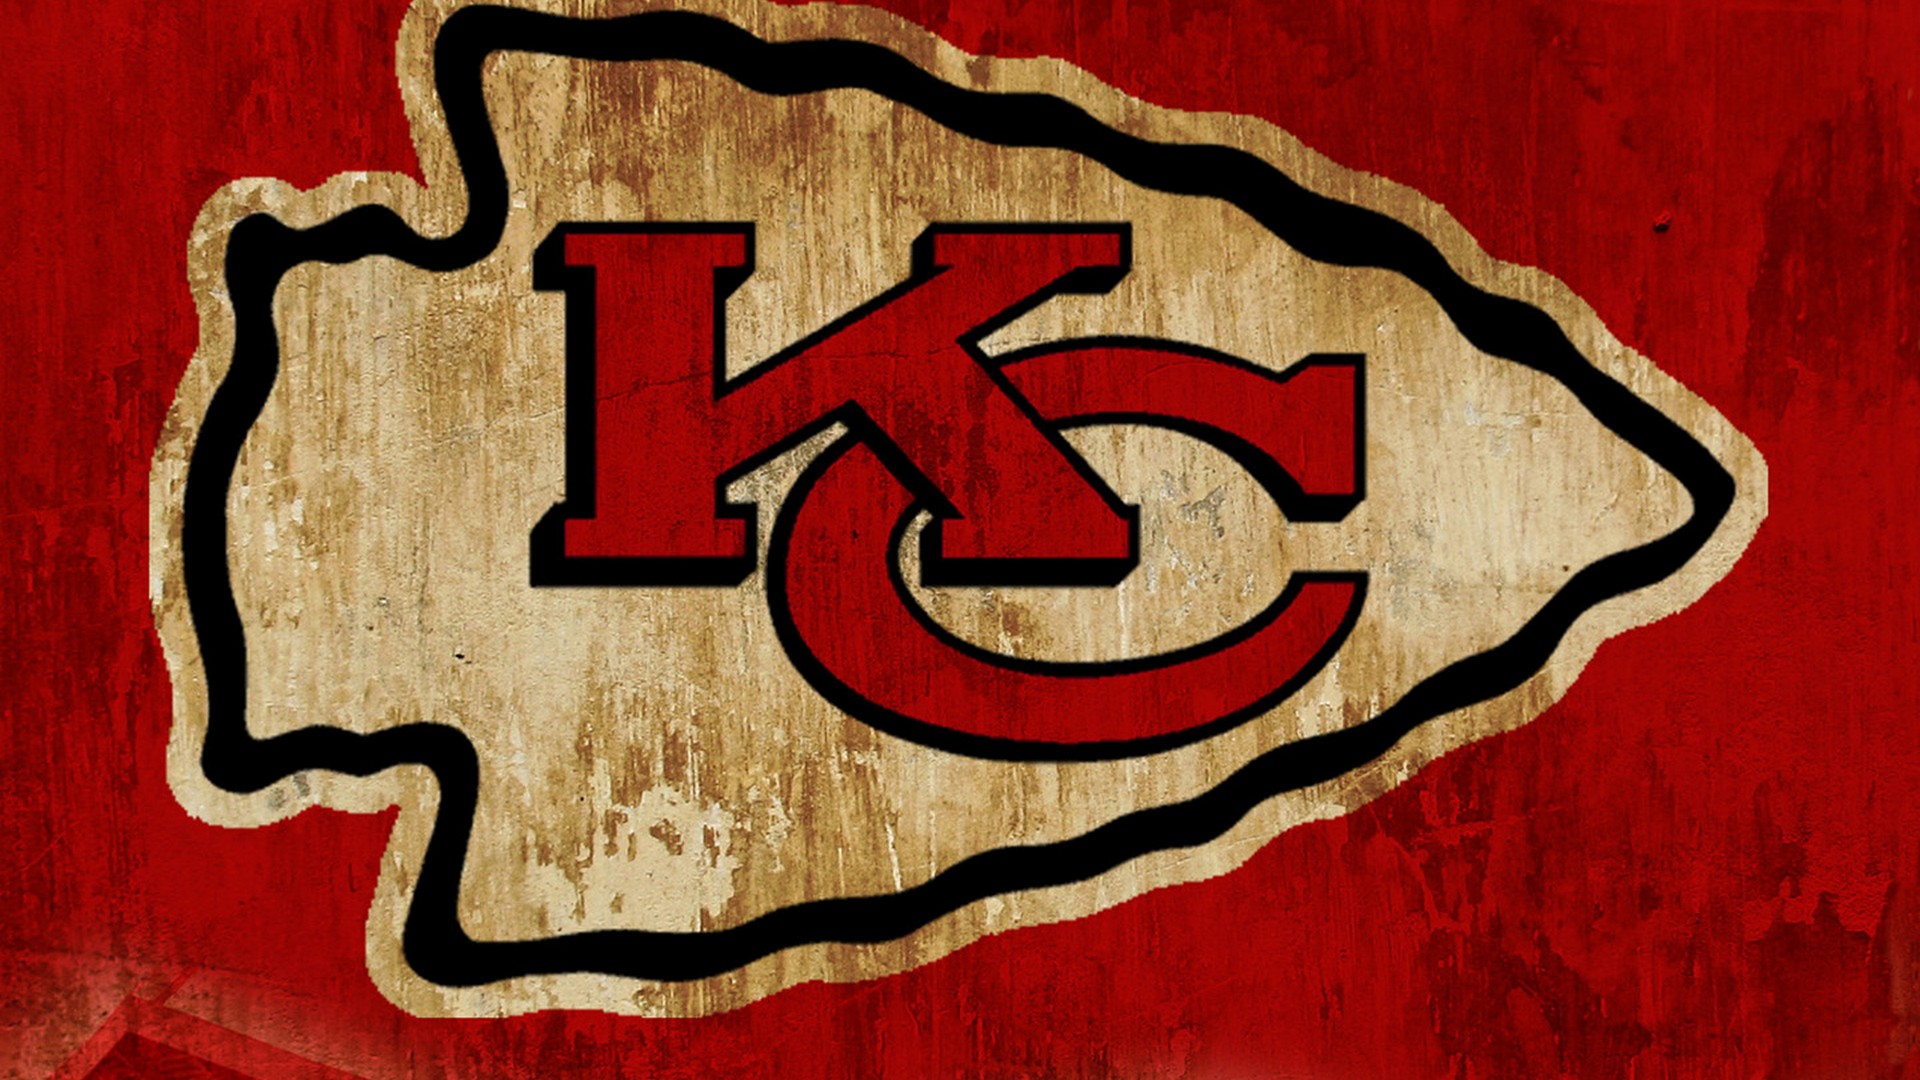 Wallpapers HD Kansas City Chiefs With Resolution 1920X1080 pixel. You can make this wallpaper for your Mac or Windows Desktop Background, iPhone, Android or Tablet and another Smartphone device for free